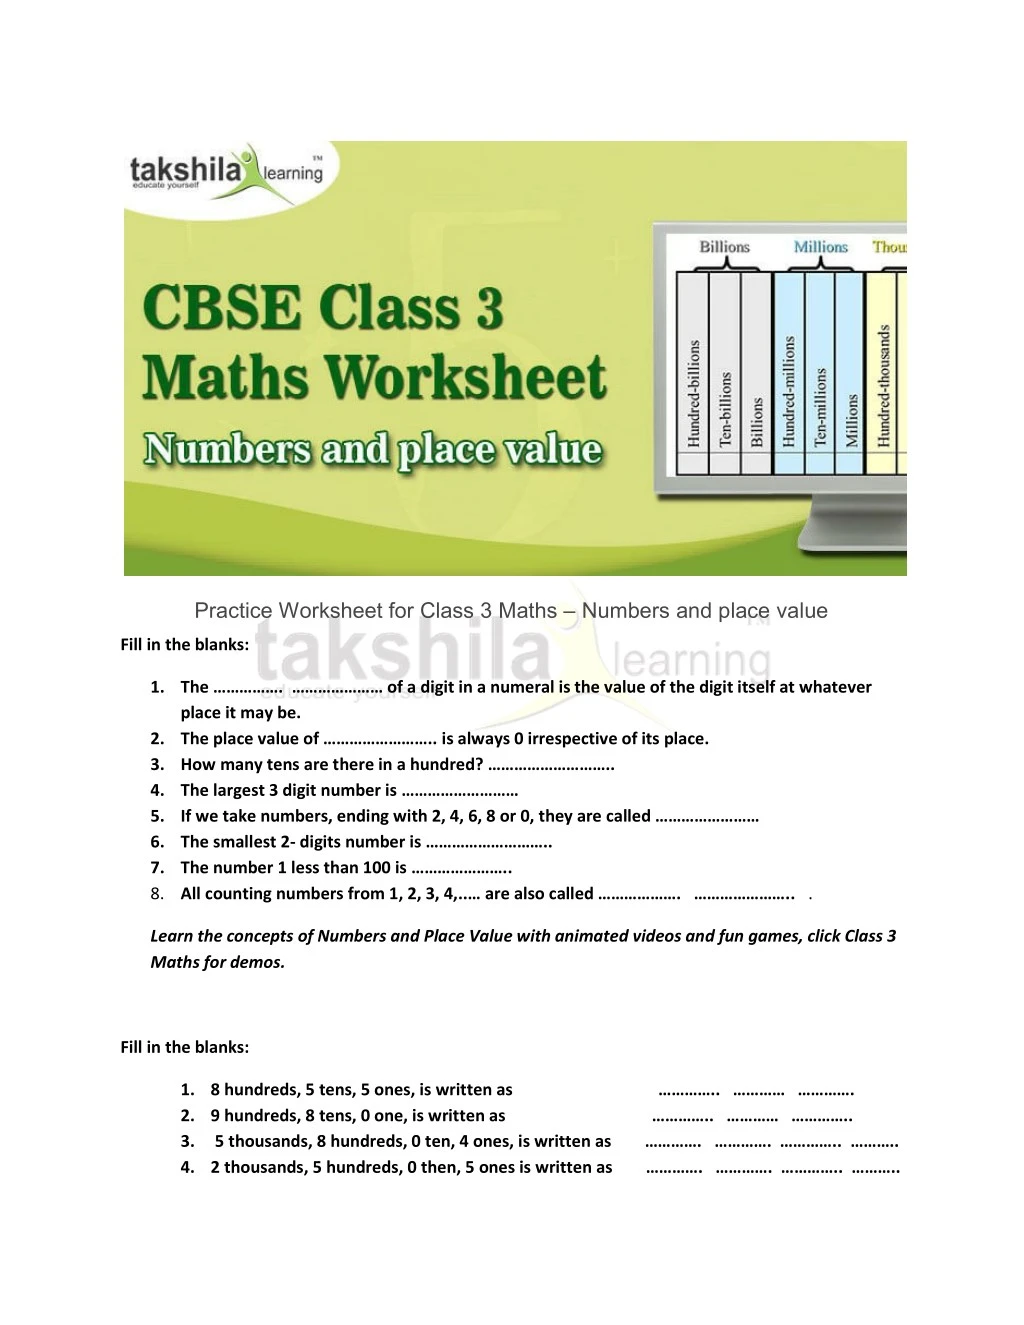 practice worksheet for class 3 maths numbers